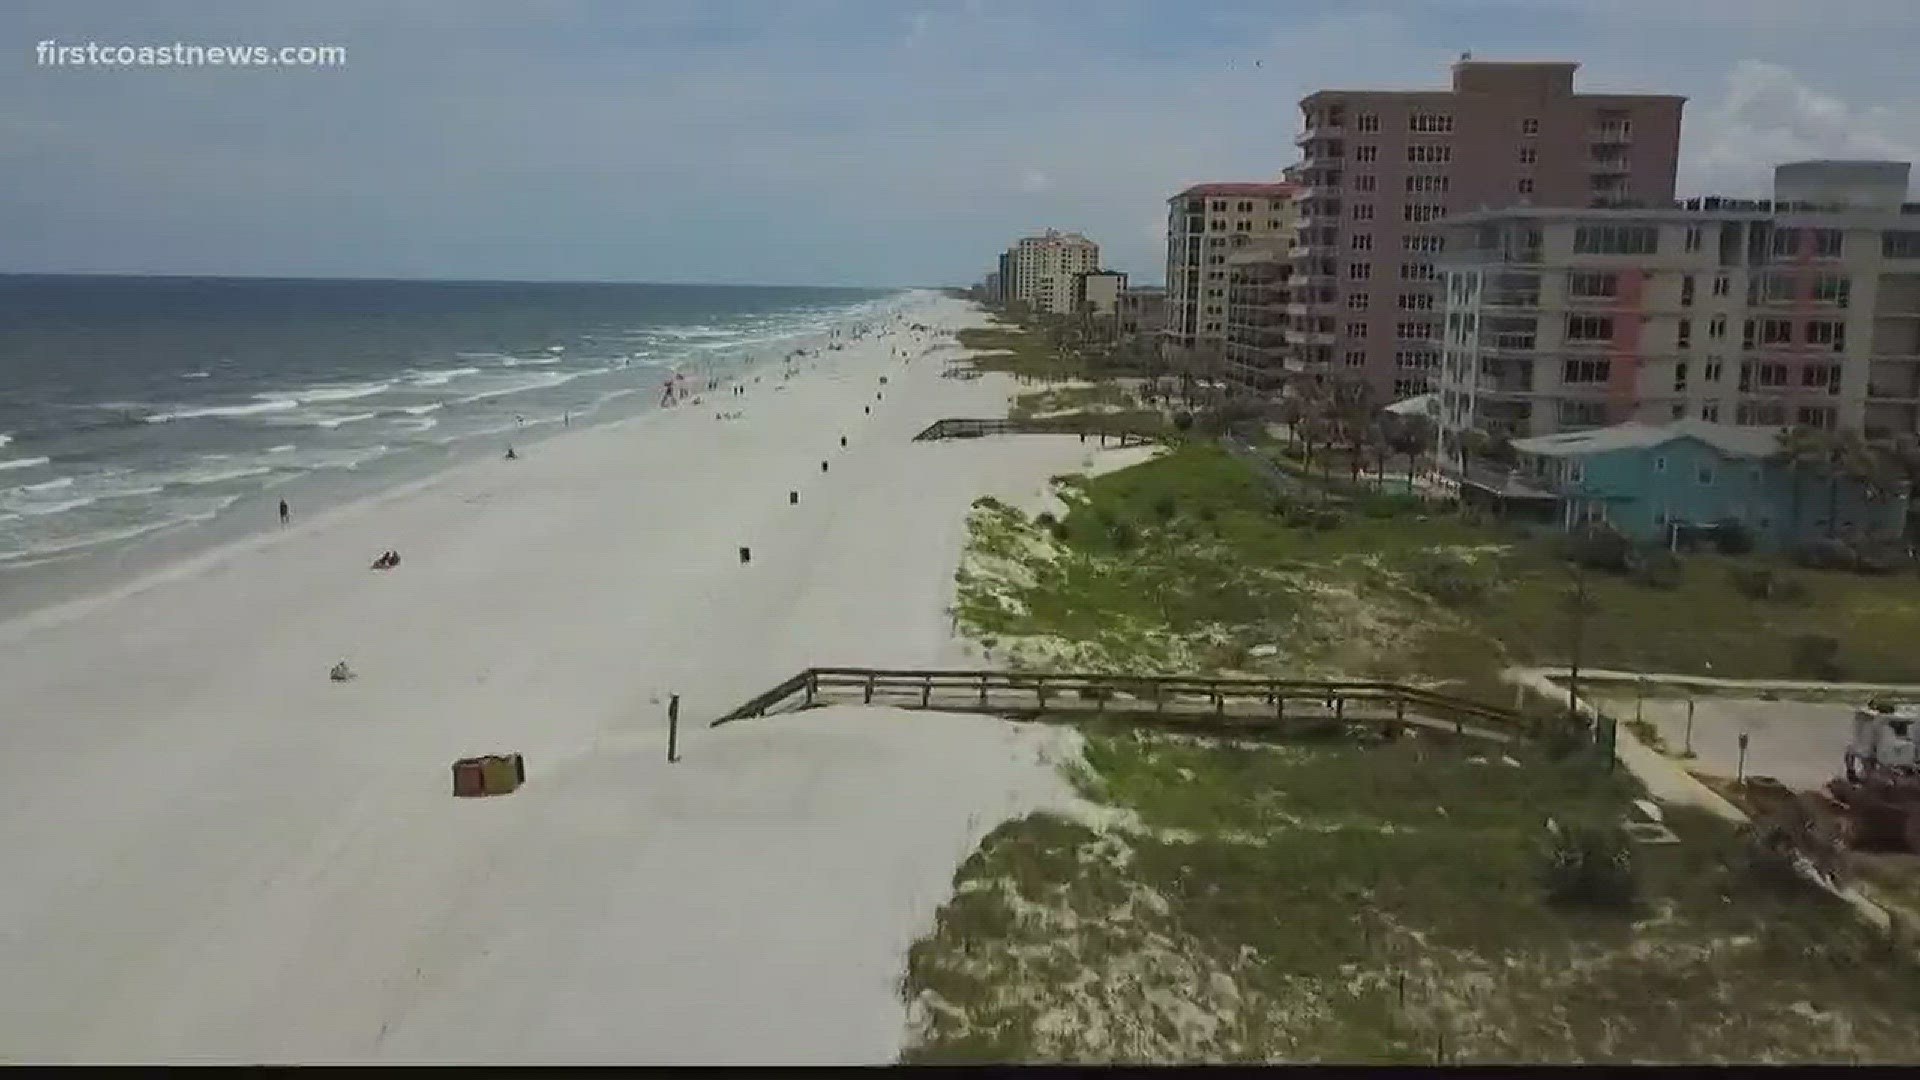 A new law could change Florida beachgoers' experience.